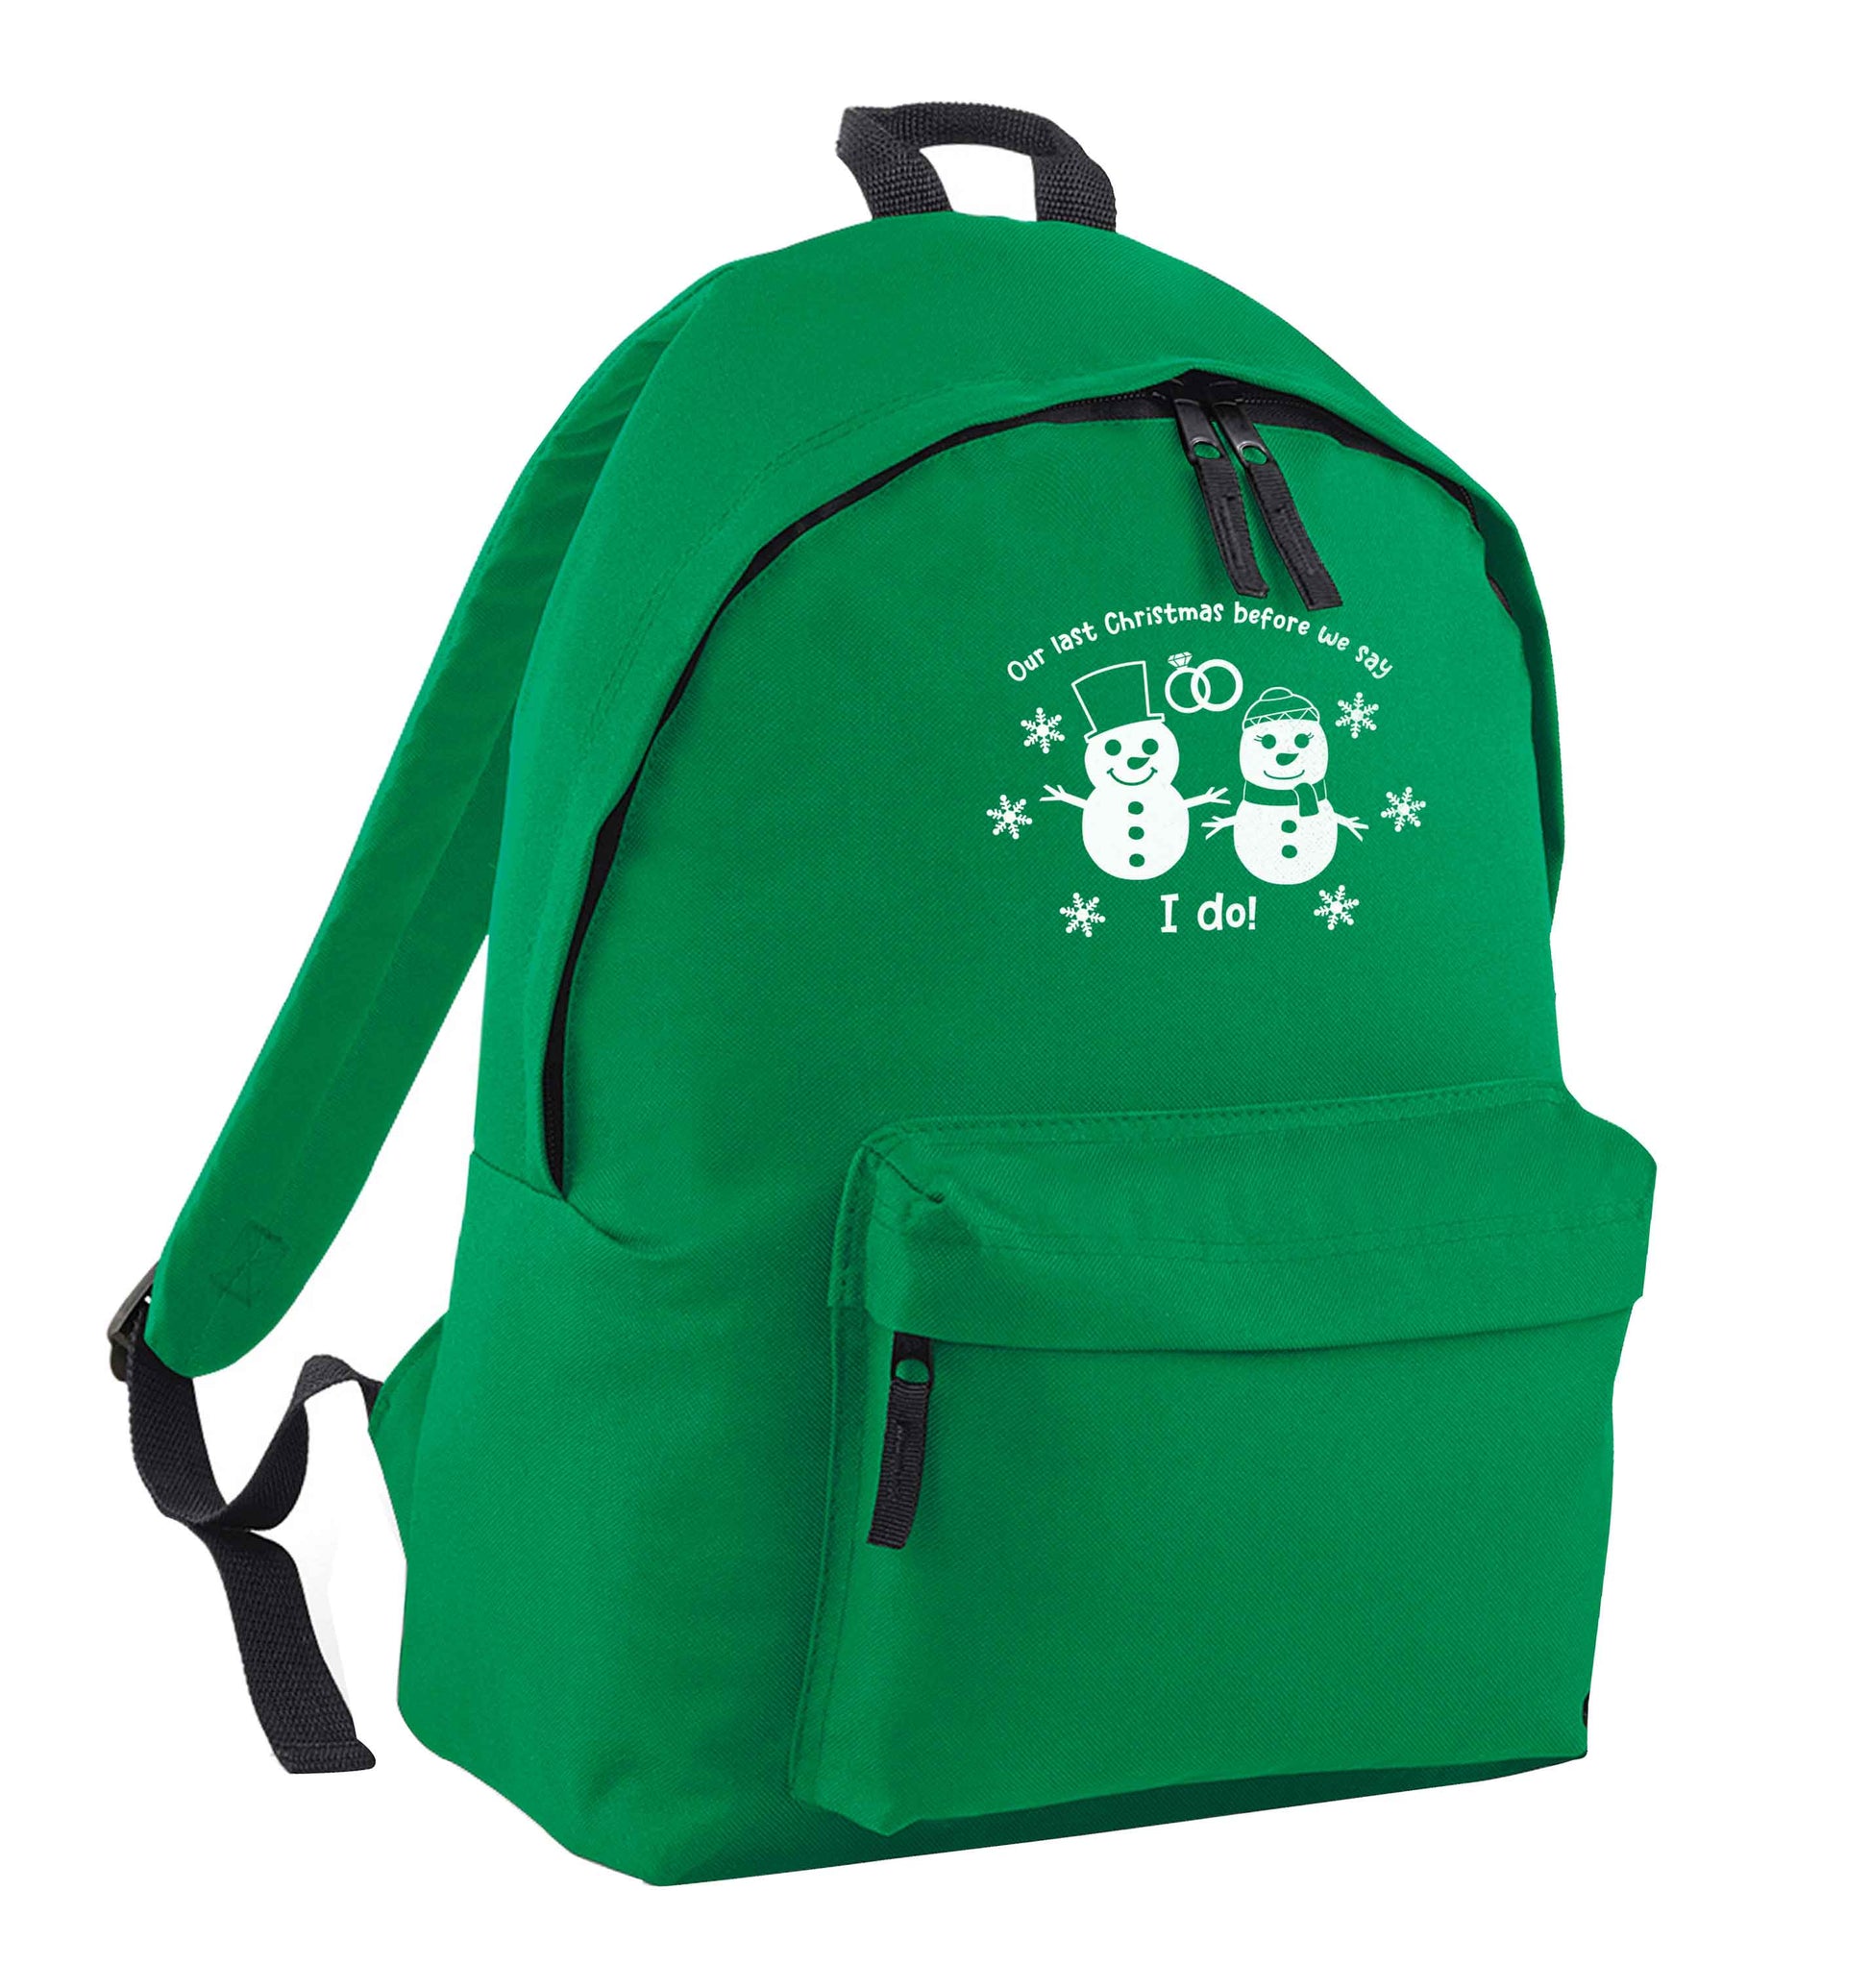 Last Christmas before we say I do green adults backpack